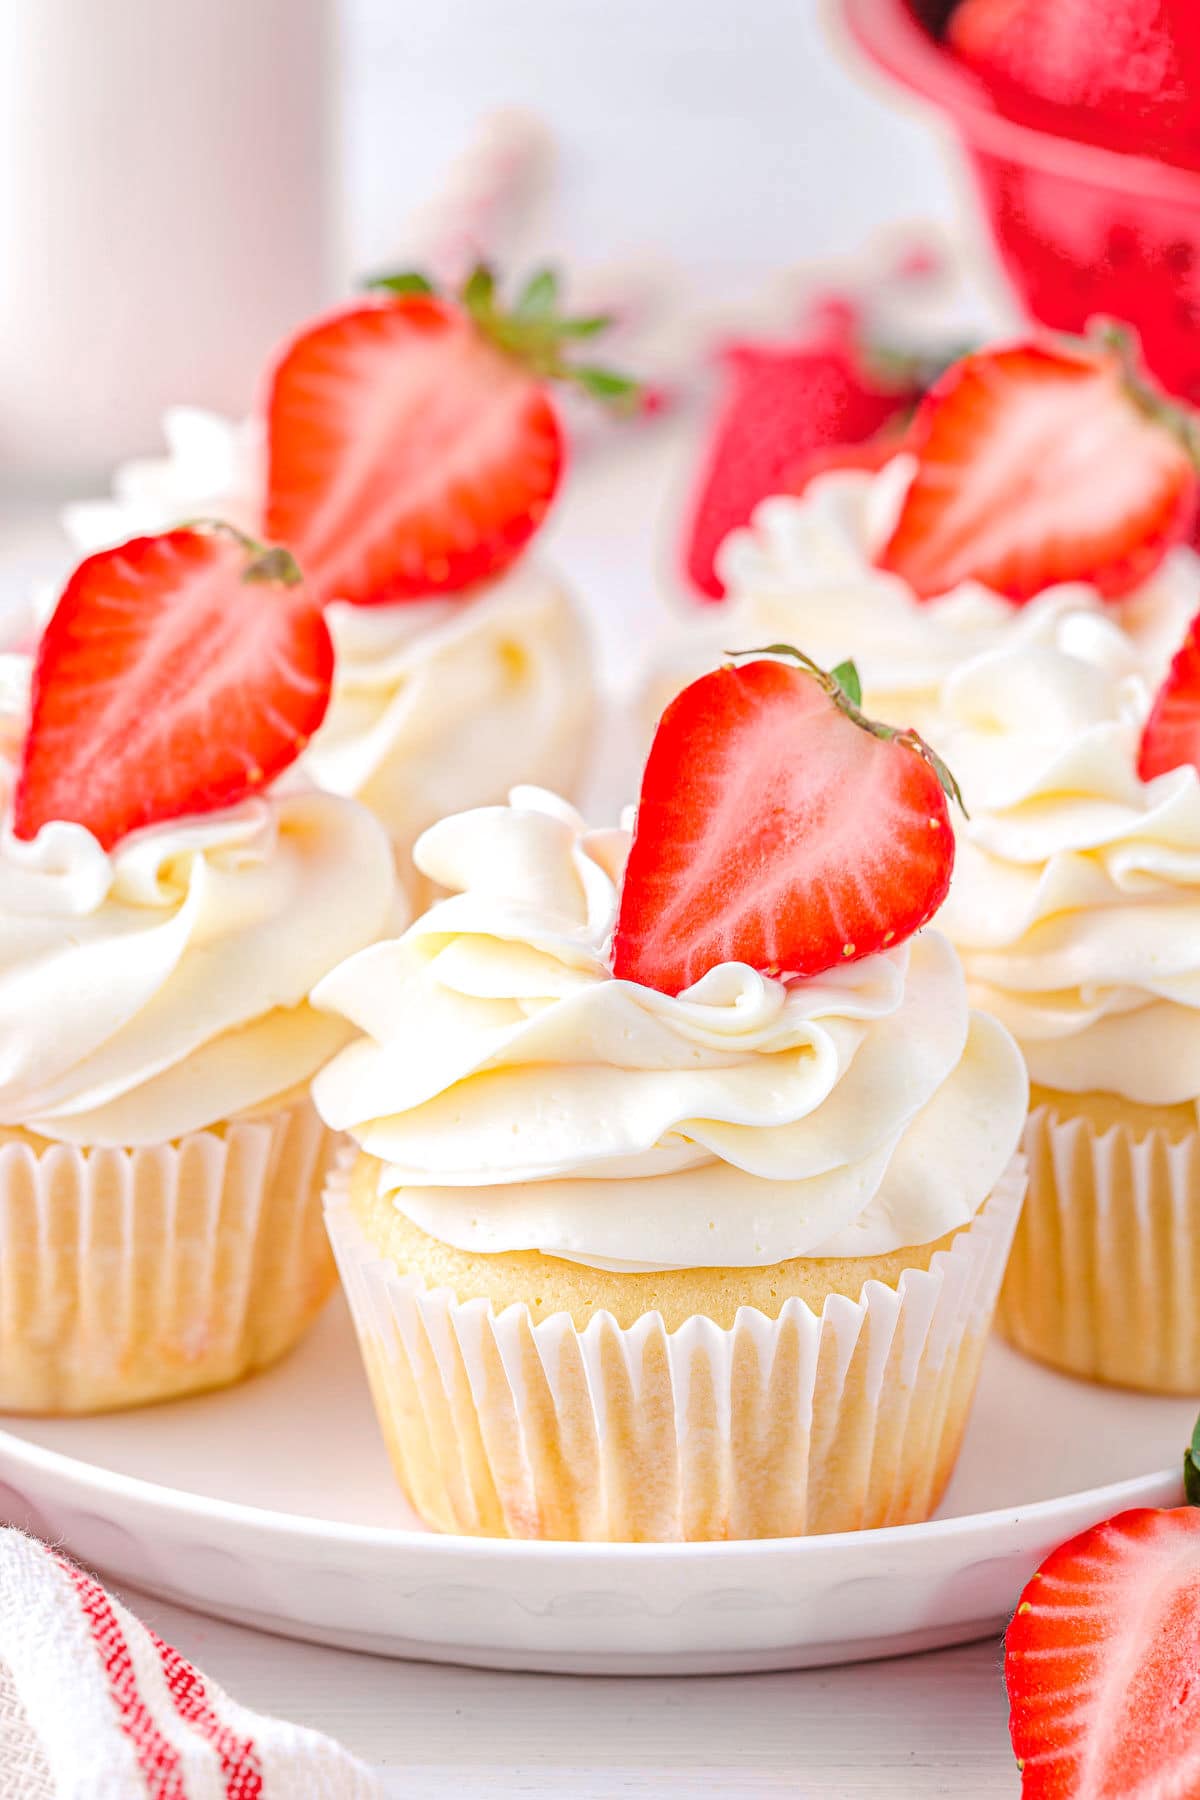 five strawberry shortcake cupcakes on a white plate topped with strawberry halves and buttercream frosting.